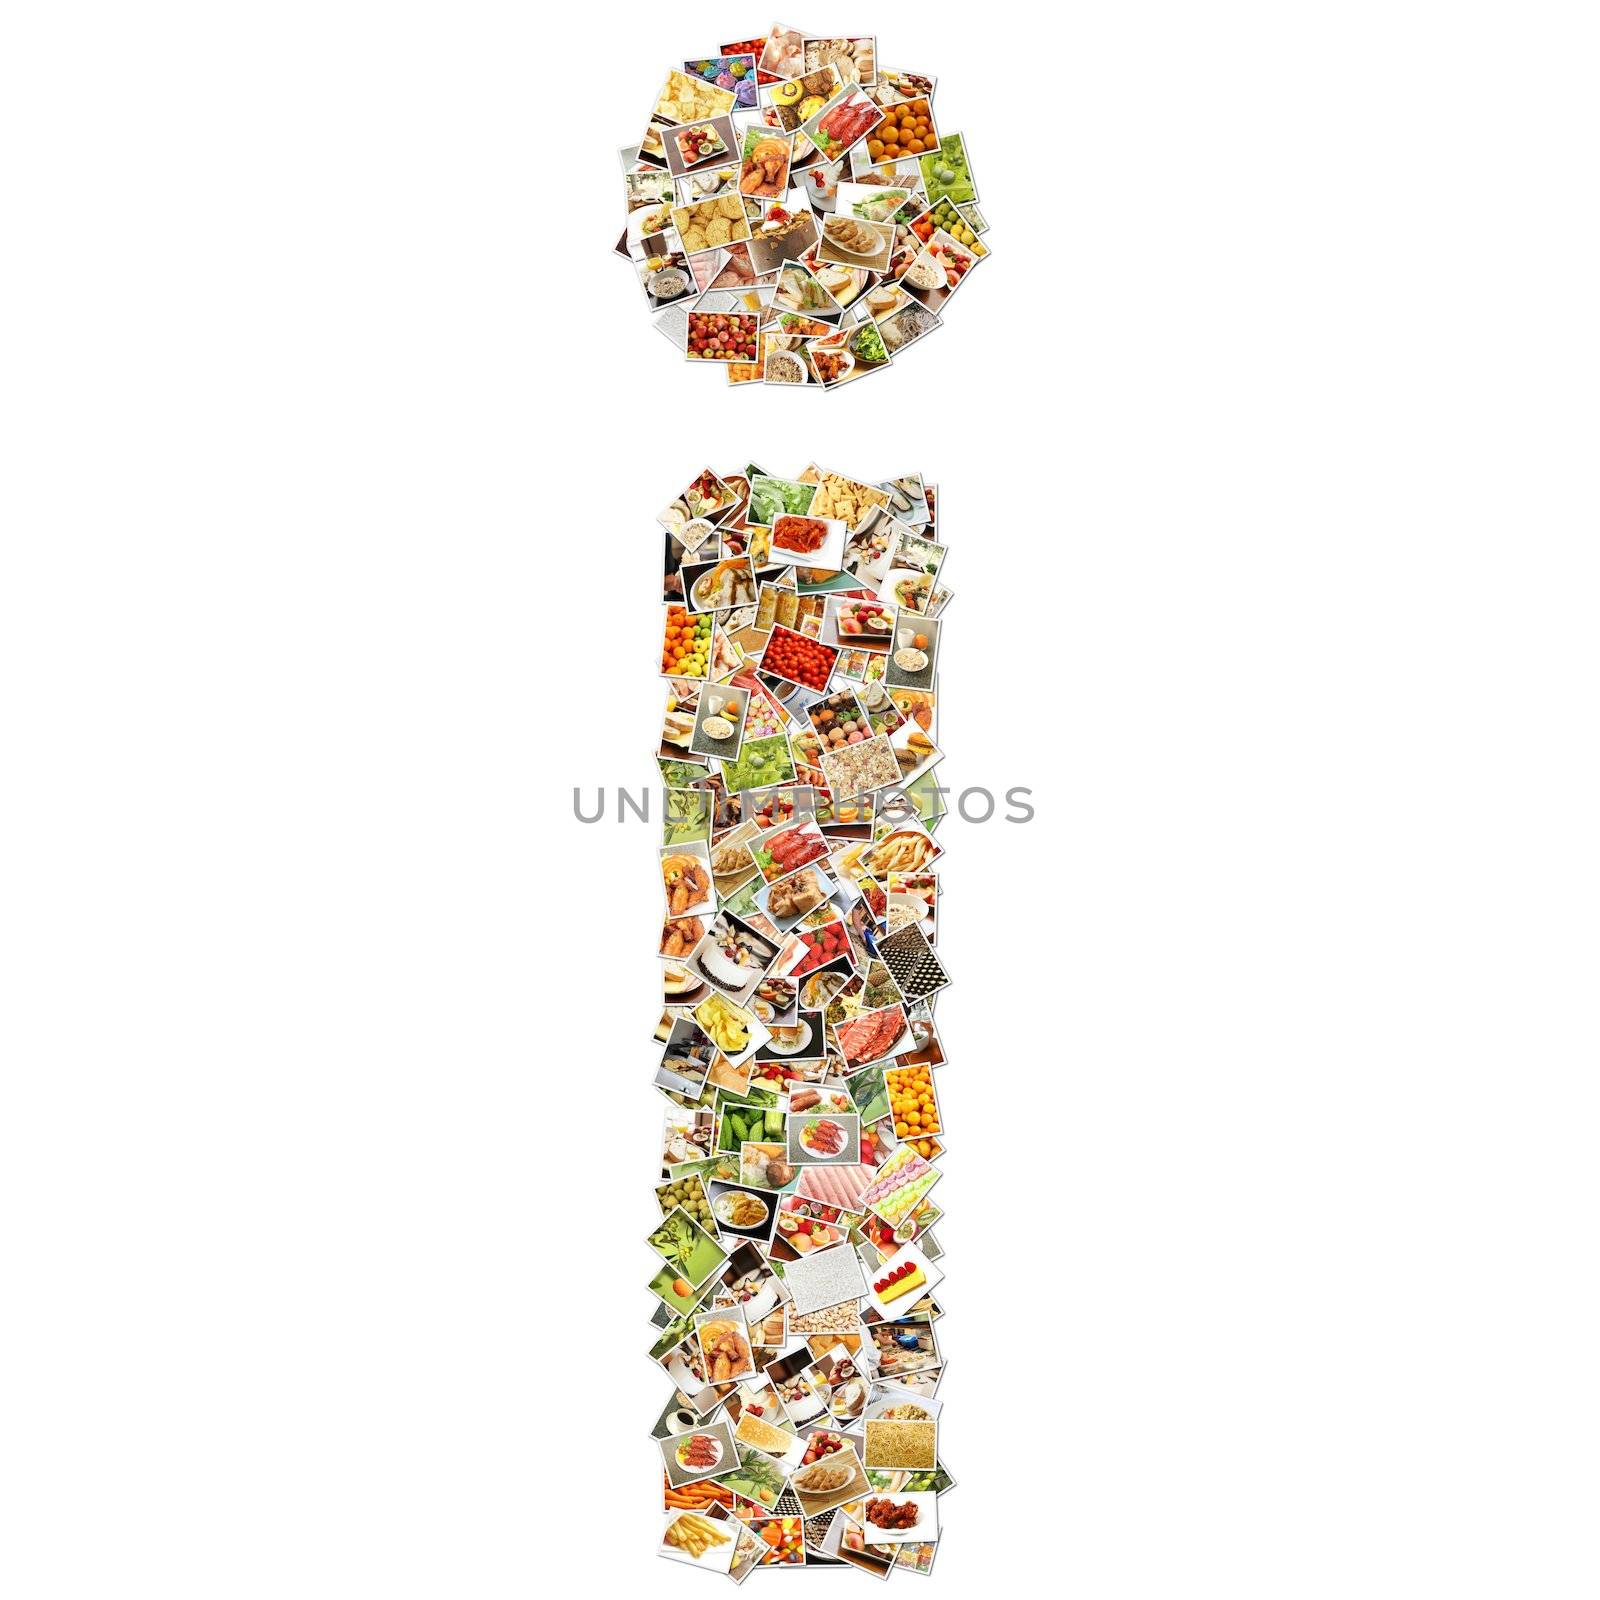 Food Art I Lowercase Shape Collage Abstract